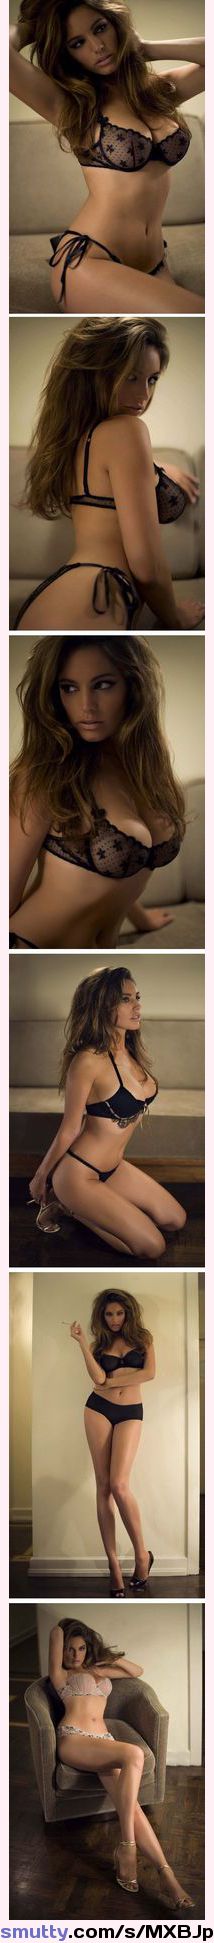 real pictures of people having sex #hot #sexy #stunning #gorgeous #perfect #beautiful #lingerie #panties #bra  #posing #model